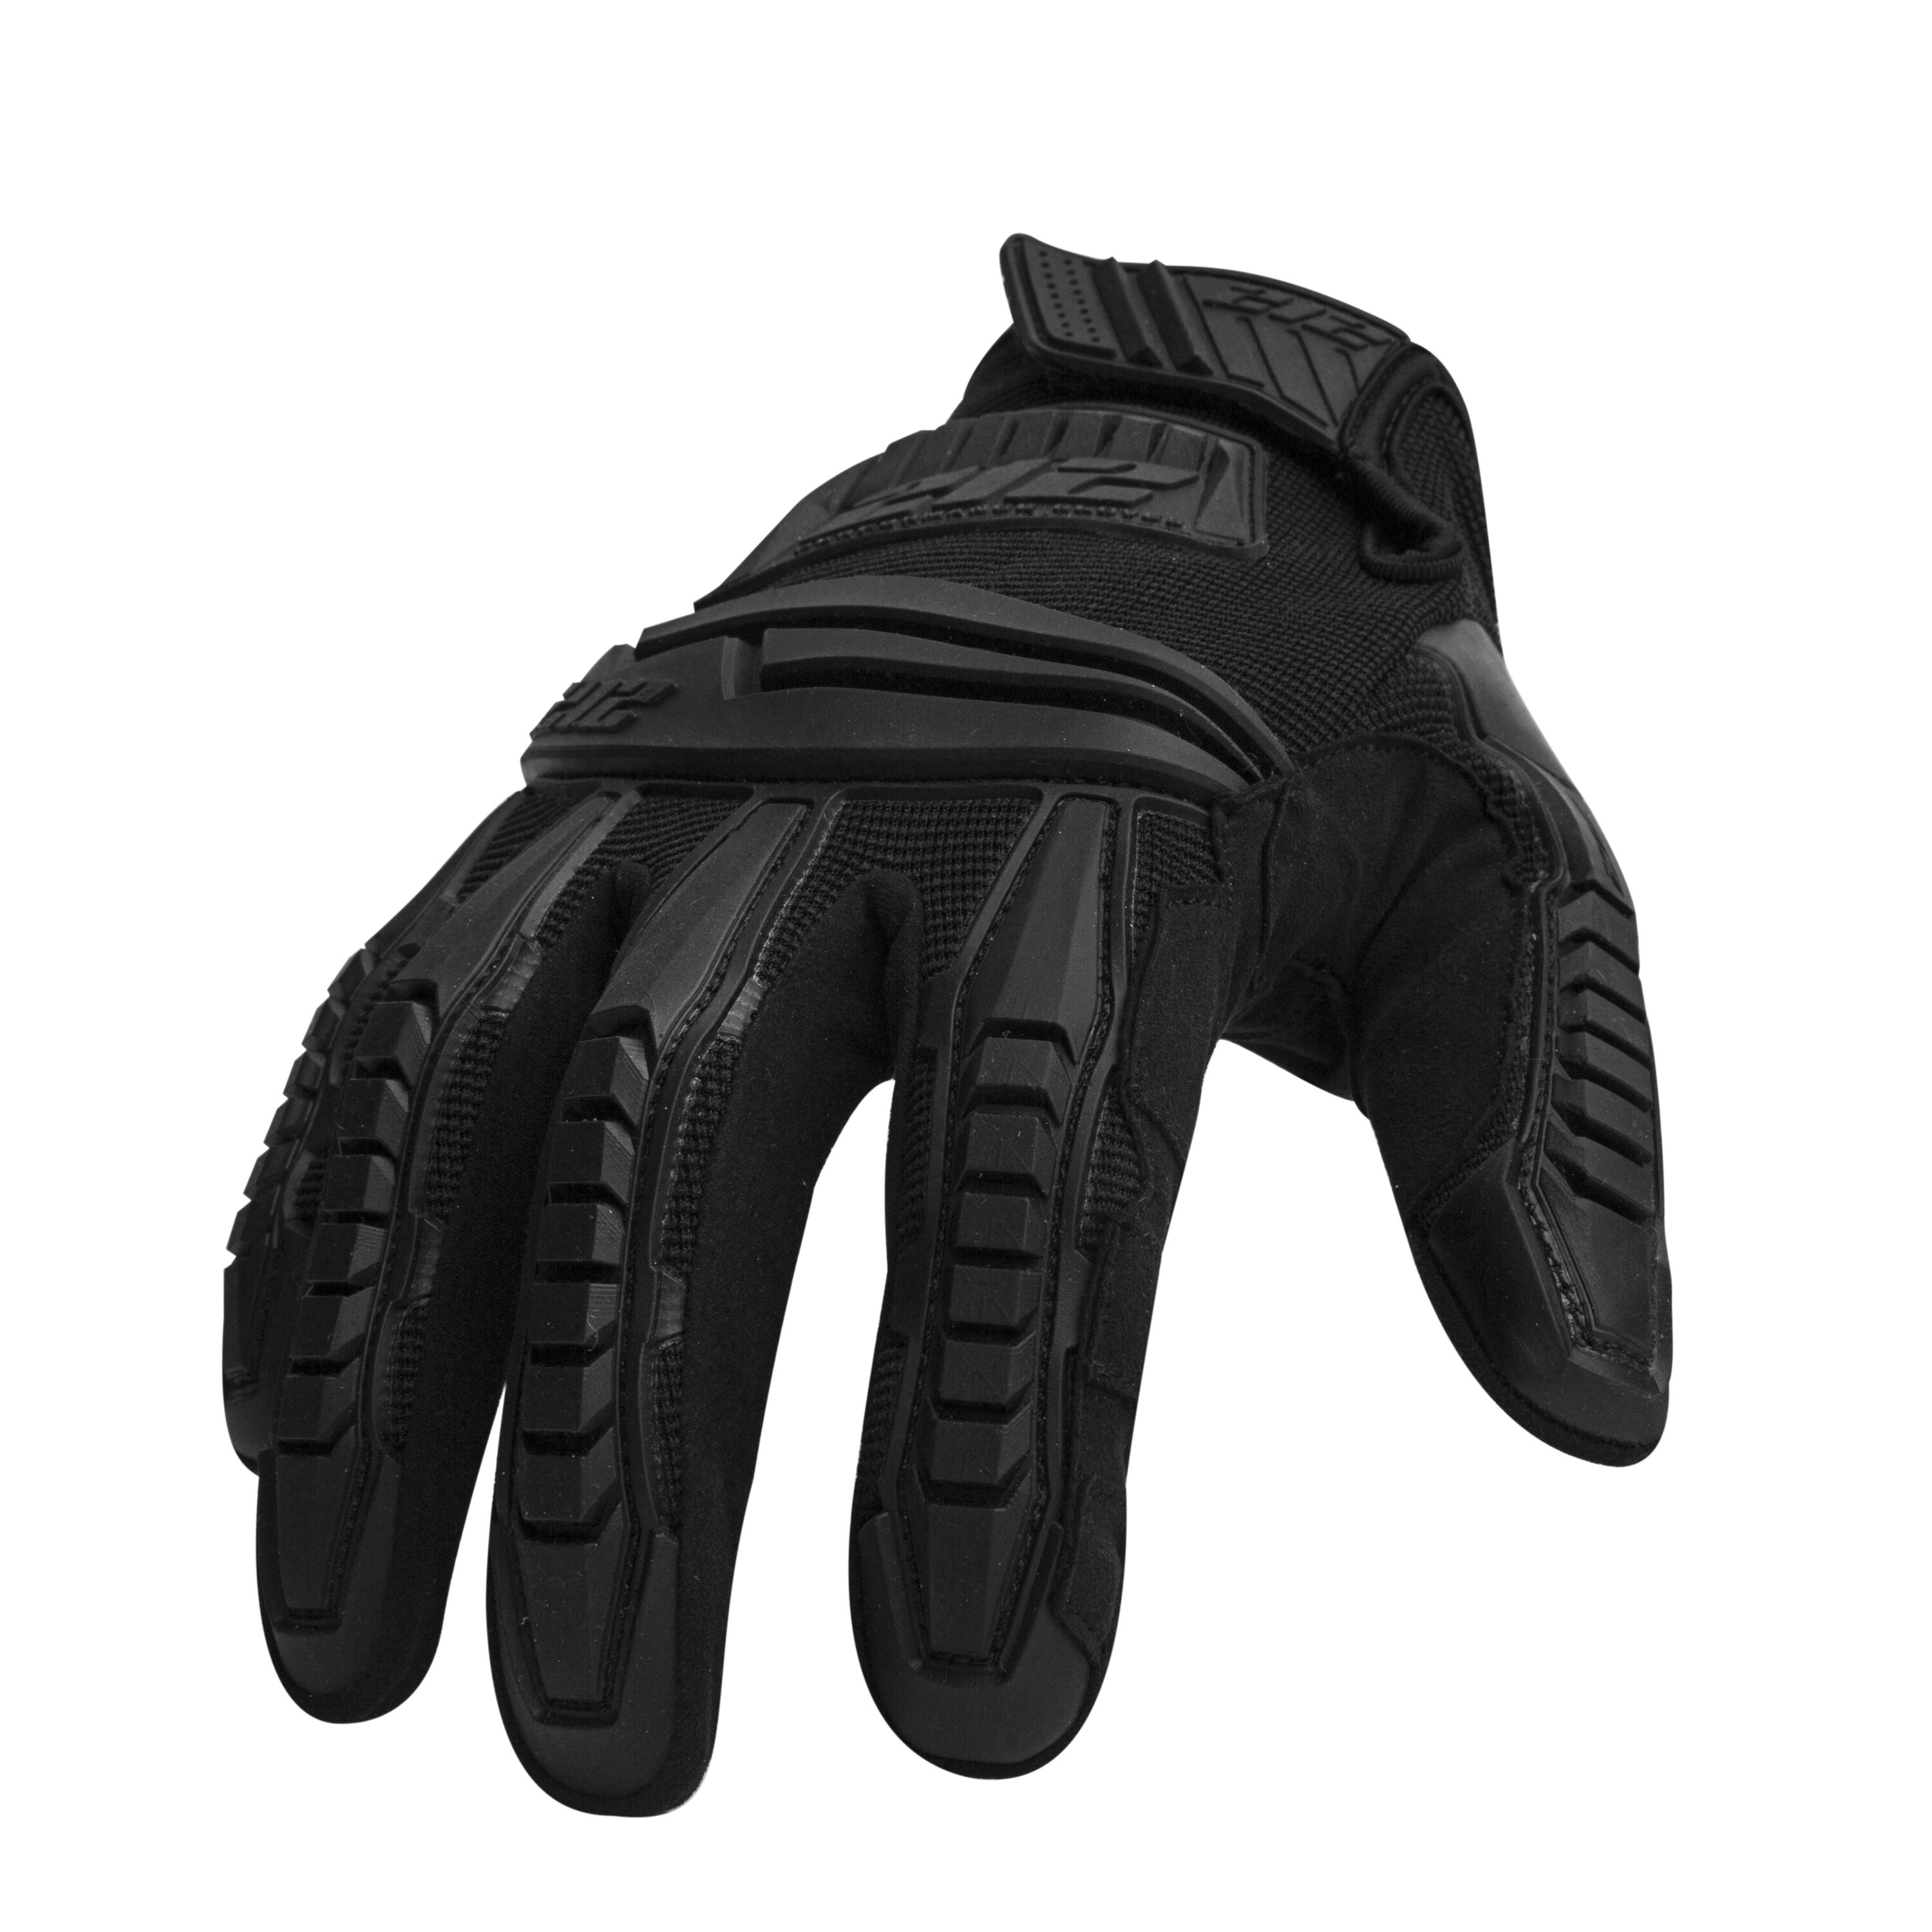 Mechanix Wear: The Original Work Glove with Secure Fit, Synthetic Leather  Performance Gloves for Multi-Purpose Use, Durable, Touchscreen Capable  Safety Gloves for Men (Black, XXX-Small) - Powersports Gloves 